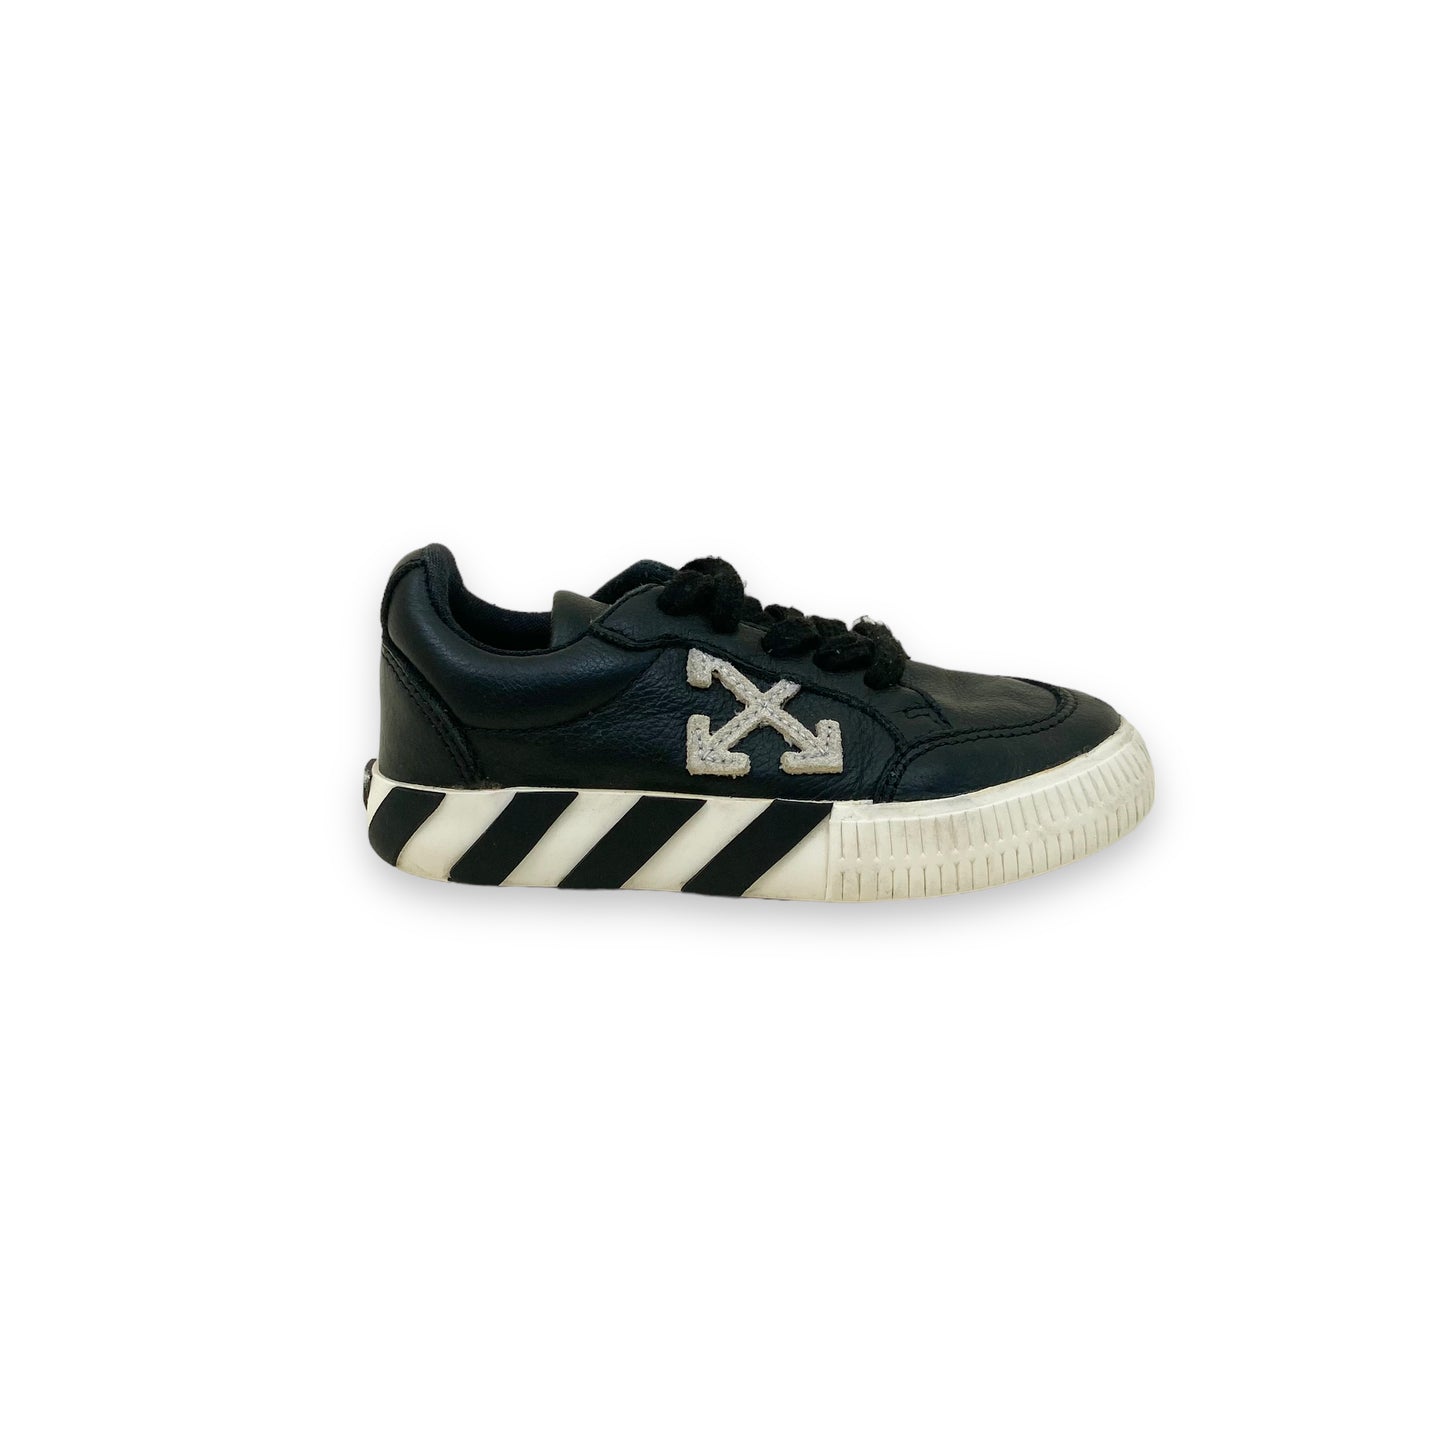 Off-White Black Leather Infants Sneakers UK8.5